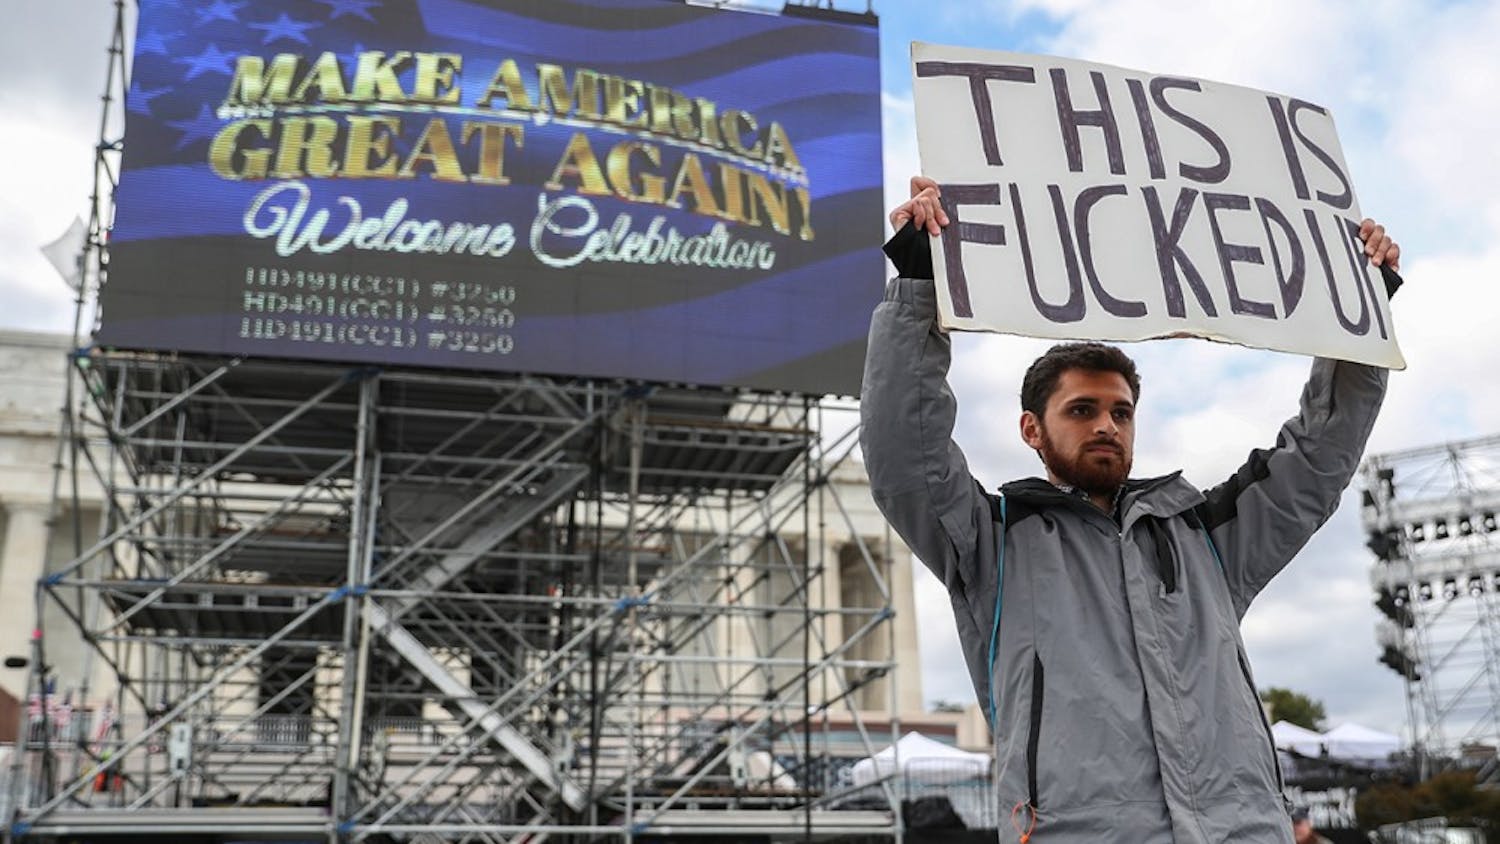 Kieran Mclean stands in front of the Lincoln Memorial protesting Donald Trump's "Welcome Celebration" on January 18, 2017. The celebration will take place at the National Mall in front of the memorial after the swearing in ceremony this coming Friday. Headliner Toby Keith will perform along with numerous guest speakers. 